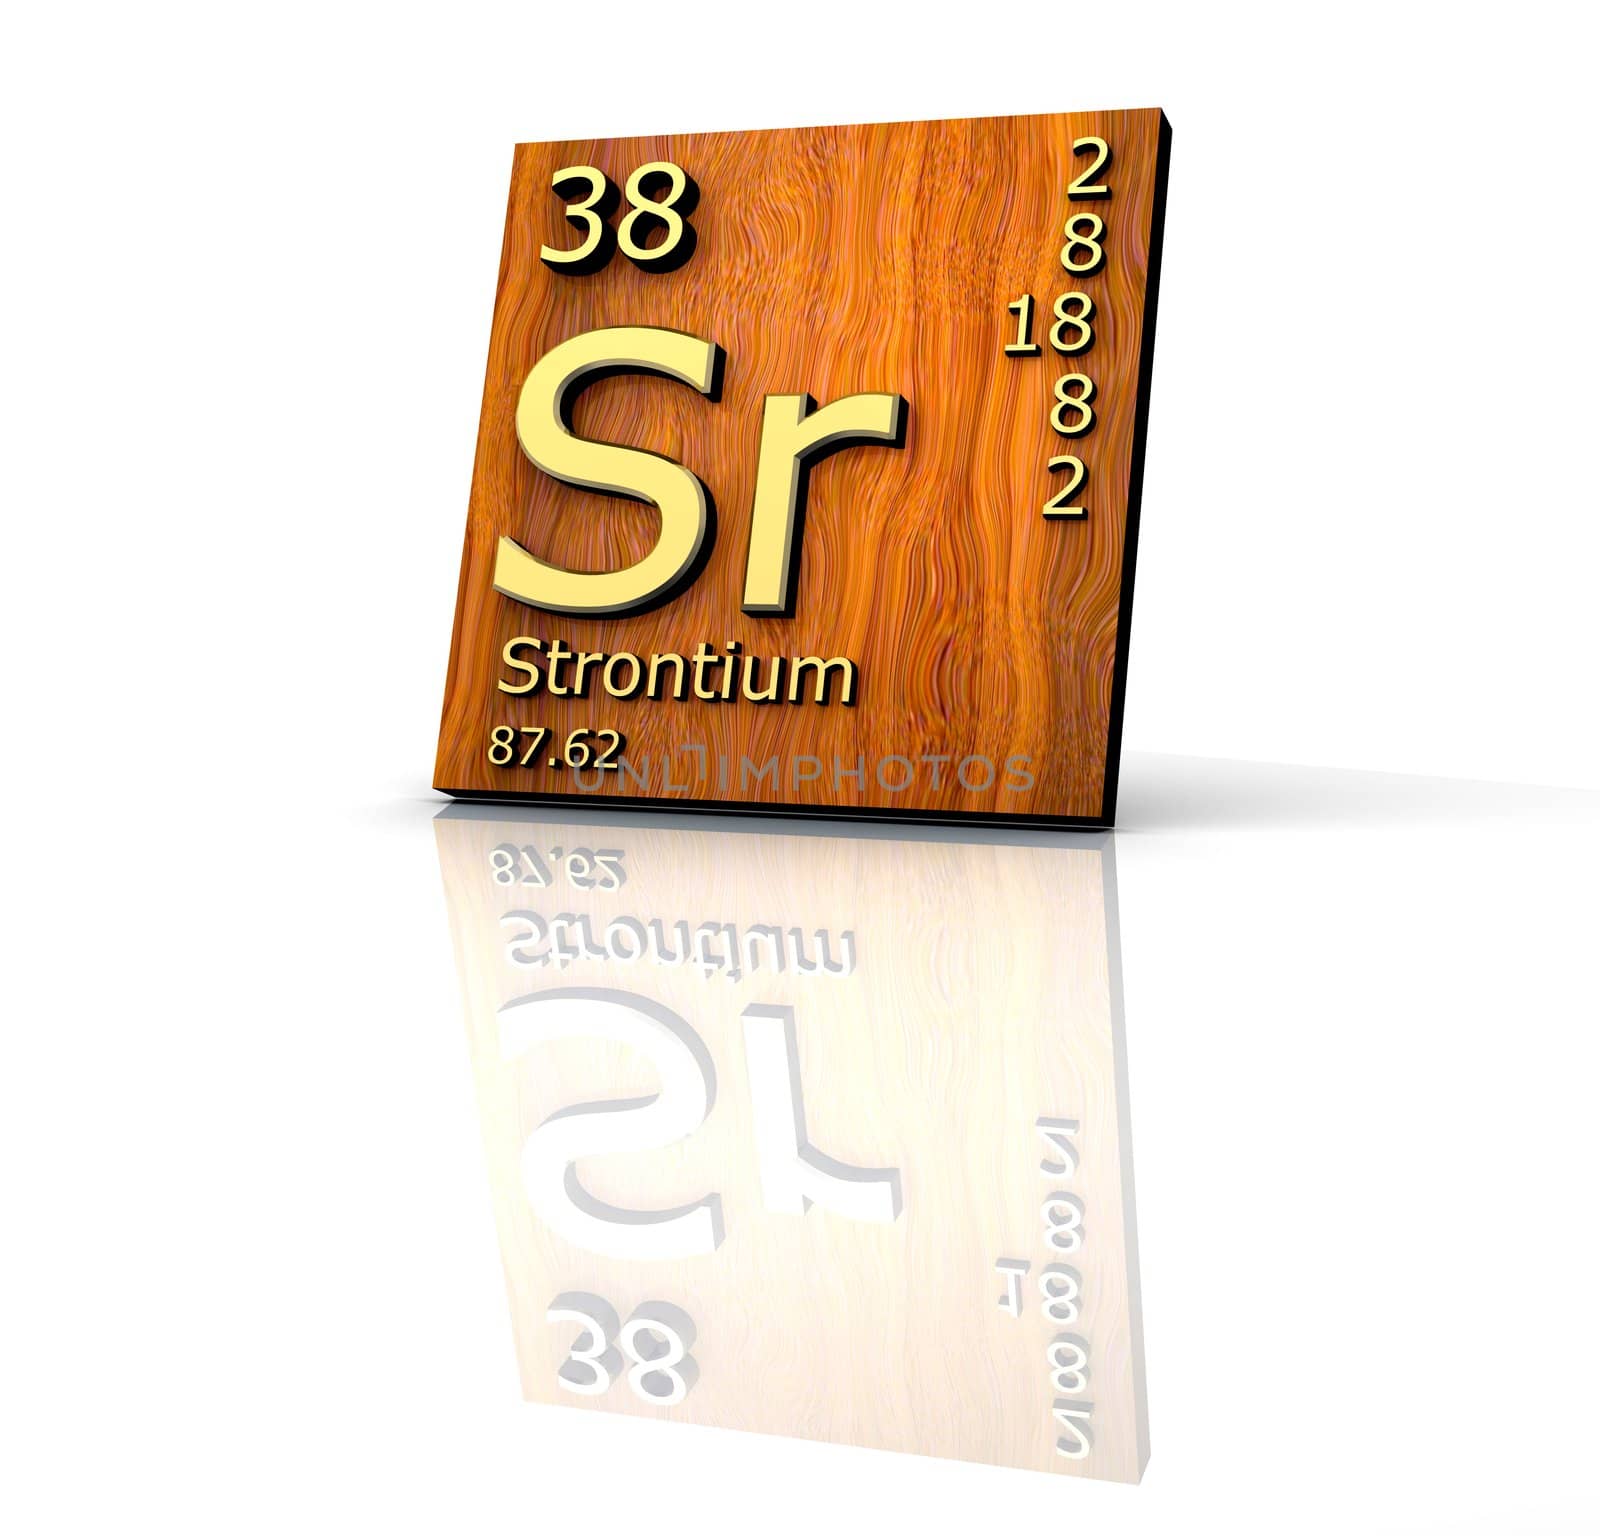 Strontium form Periodic Table of Elements - wood board - 3d made